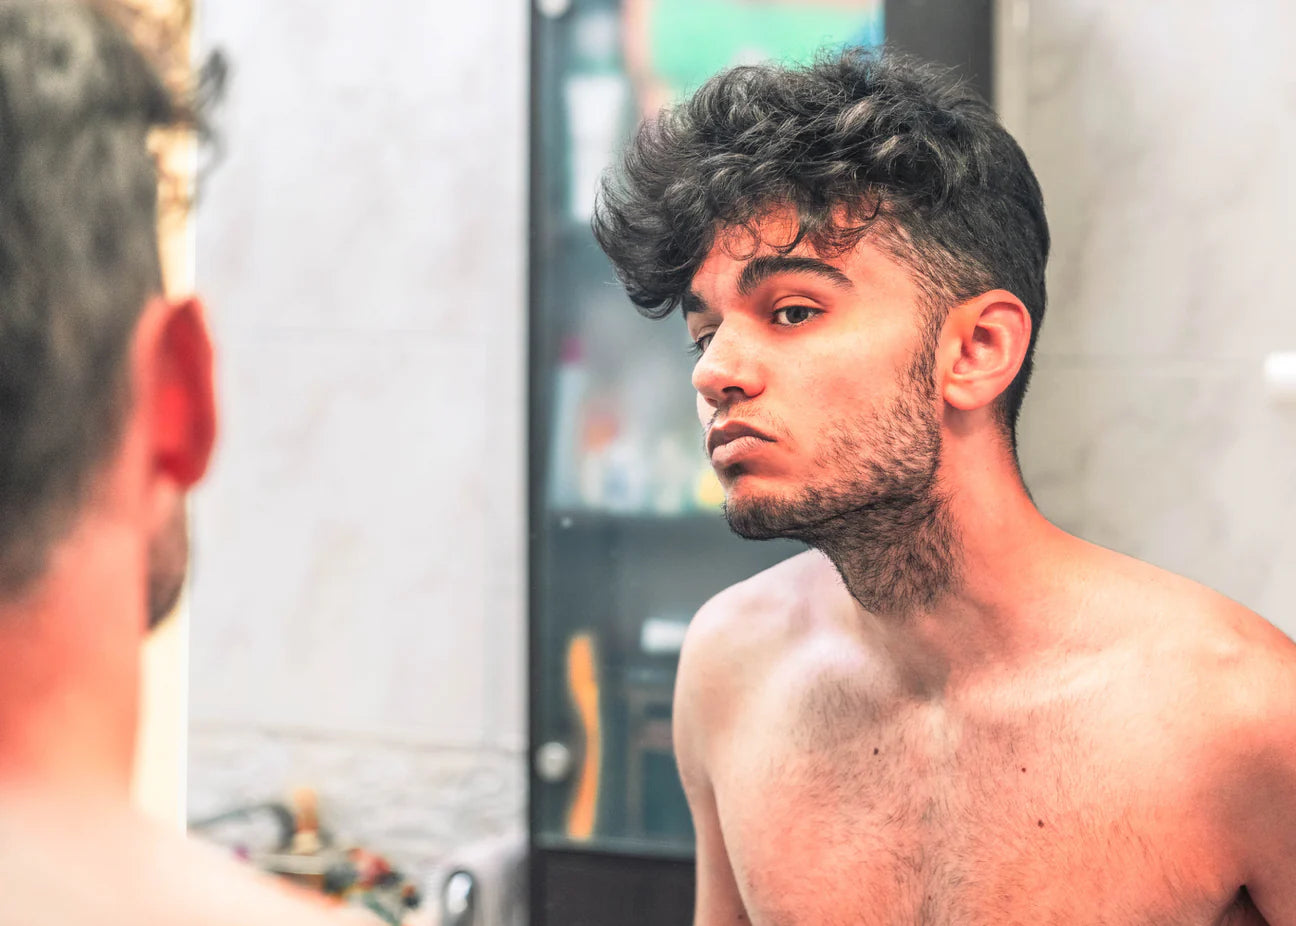 Man looking in mirror at stubble and hair.